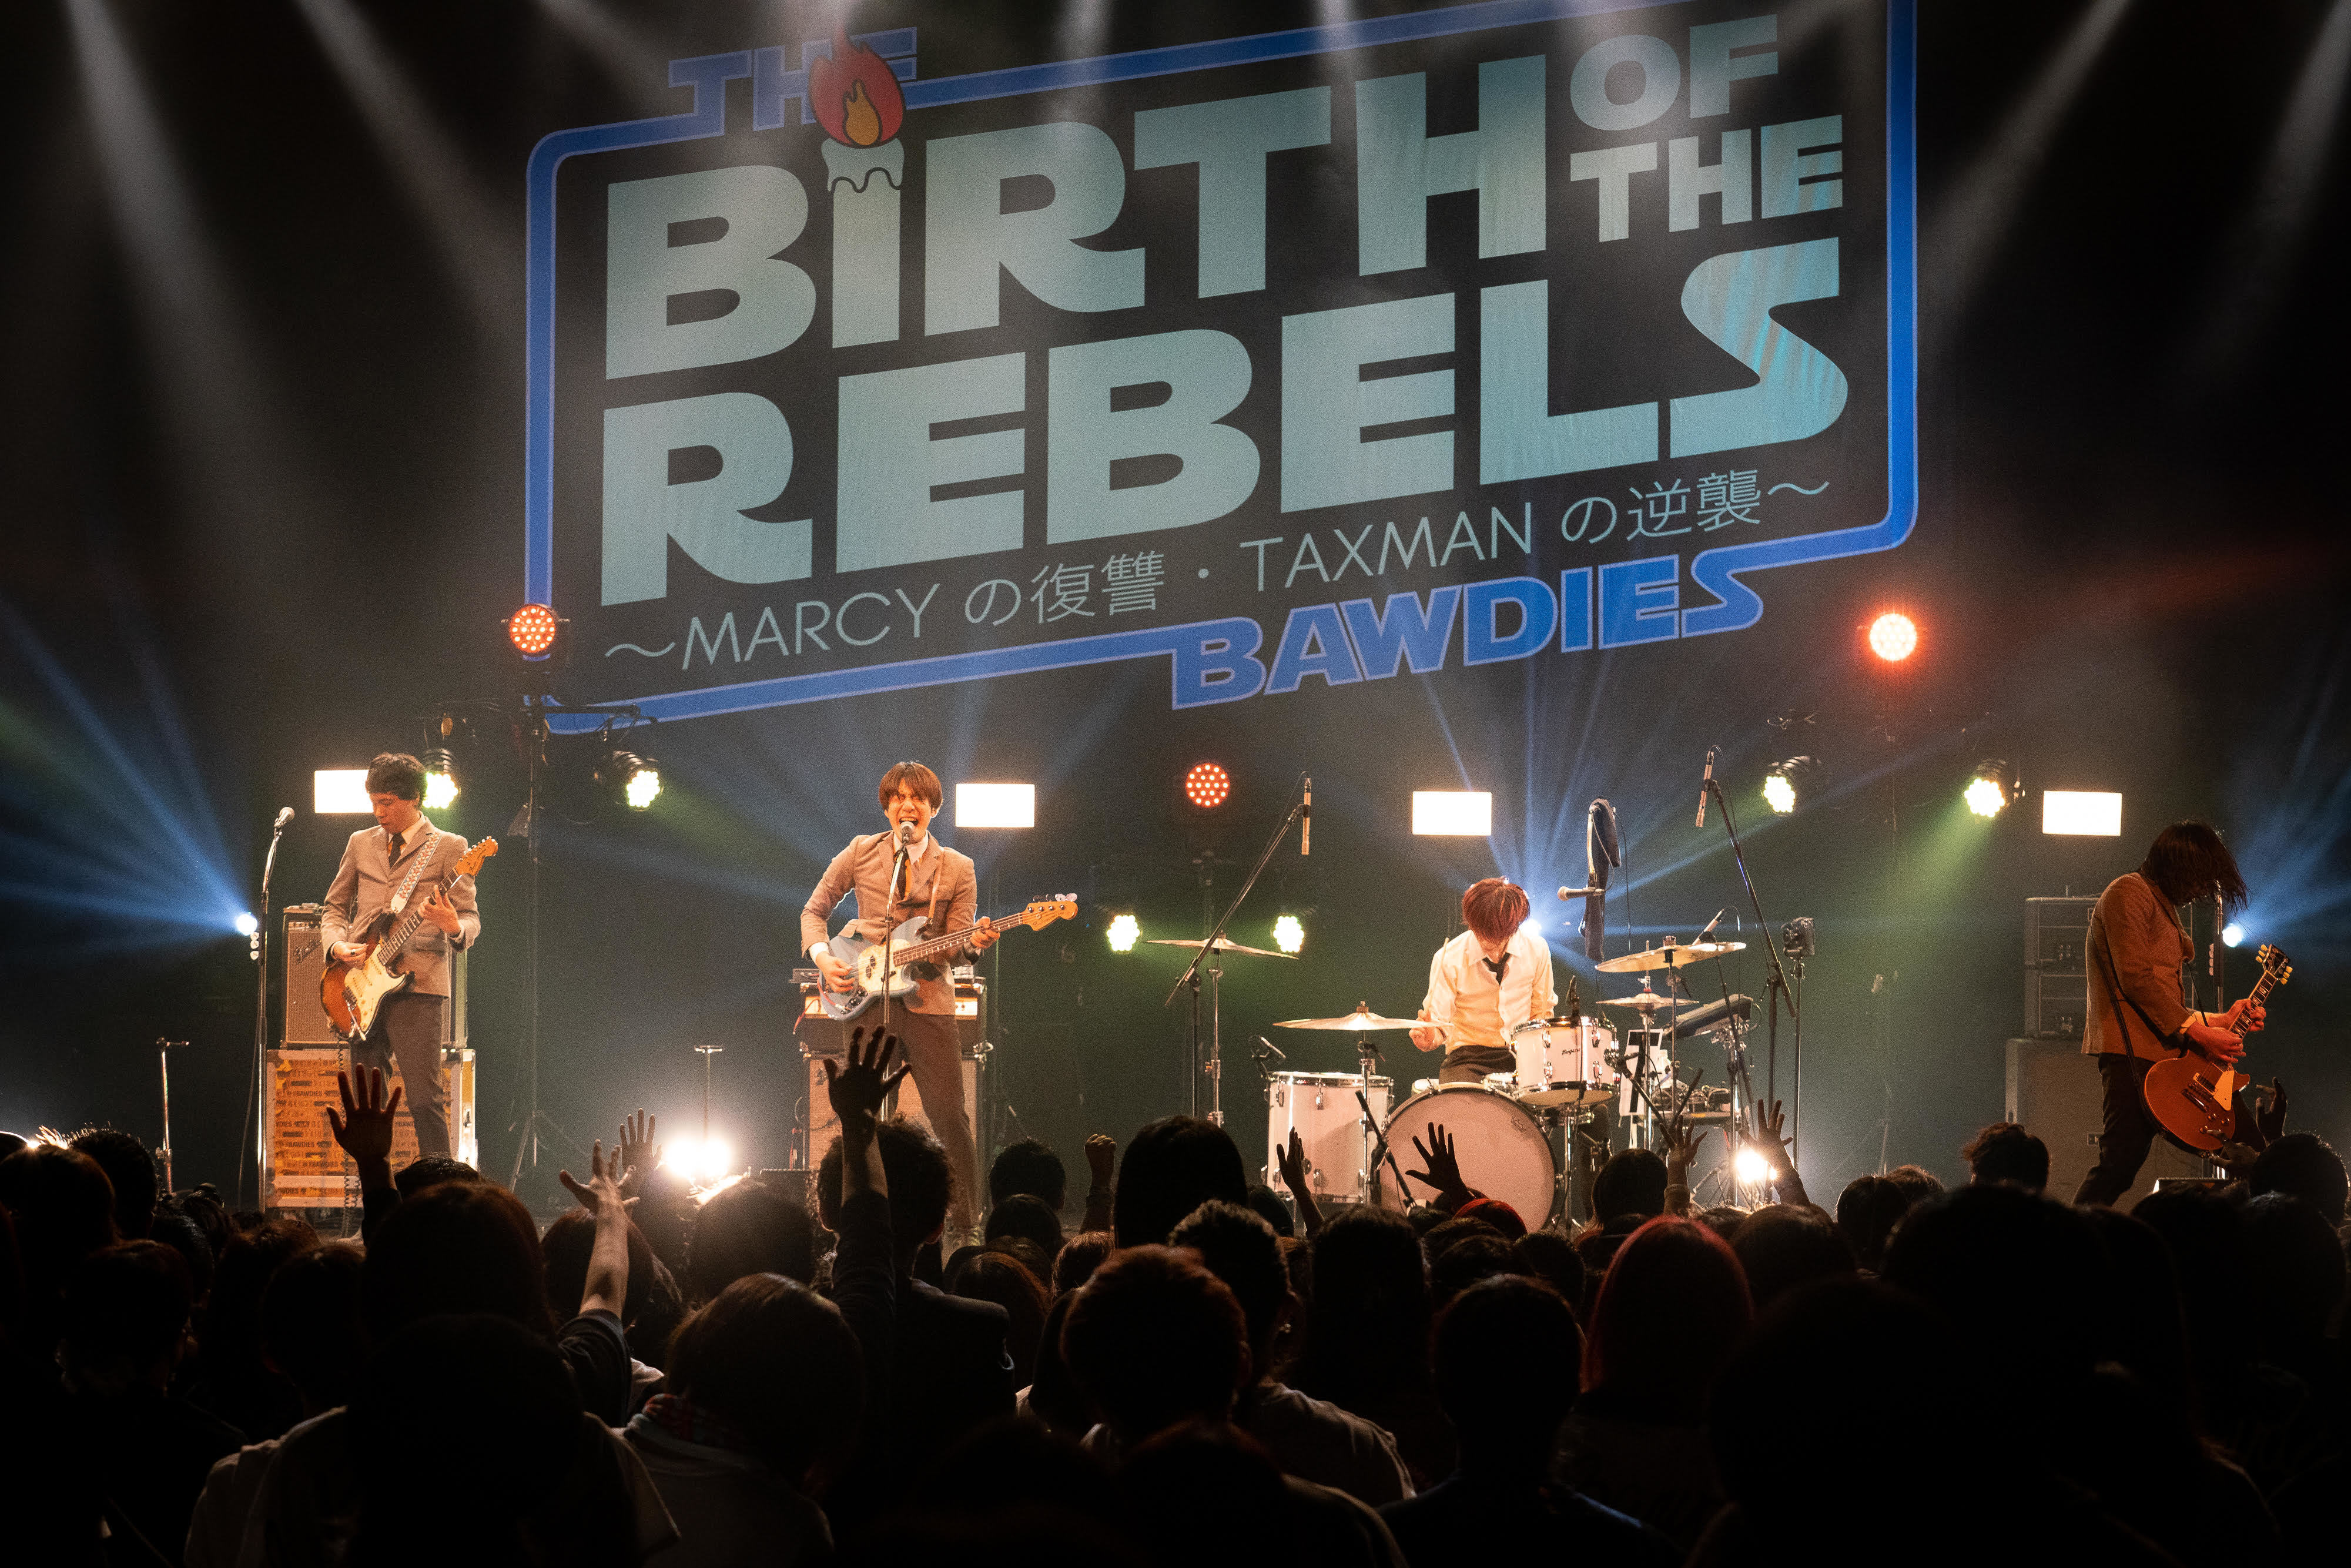 「BIRTH OF THE REBELS TOUR ～MARCYの復讐・TAXMANの逆襲～」11/8 東京公演より「GET OUT OF MY WAY」Live Videoが公開！